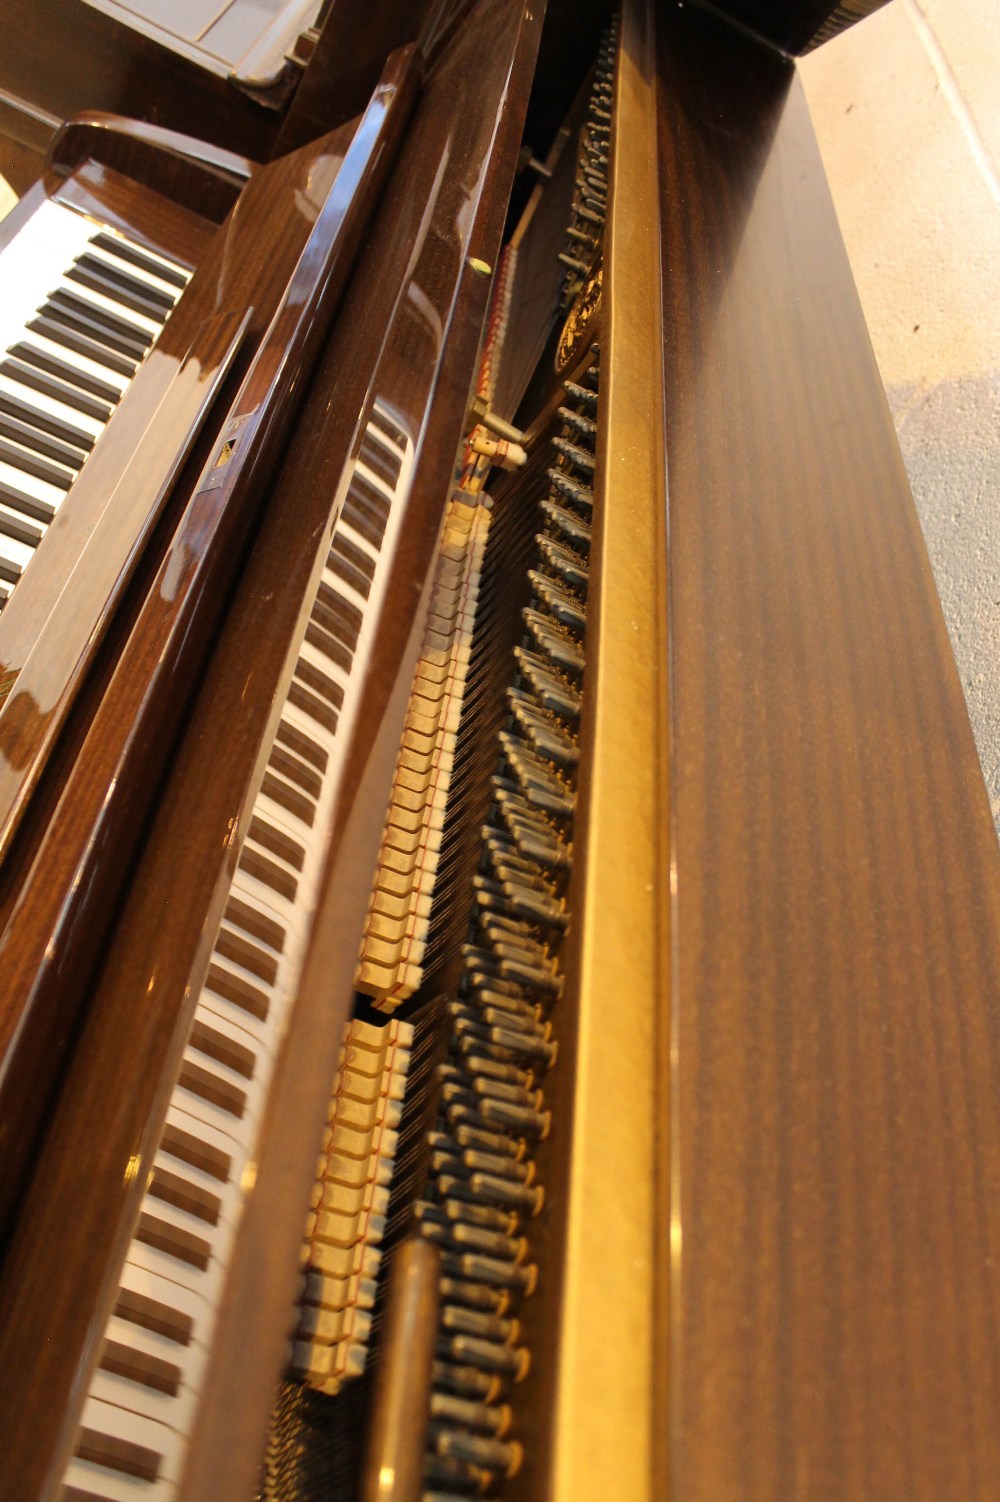 Bechstein (c1979) An upright piano in a modern style bright mahogany case - Image 4 of 4